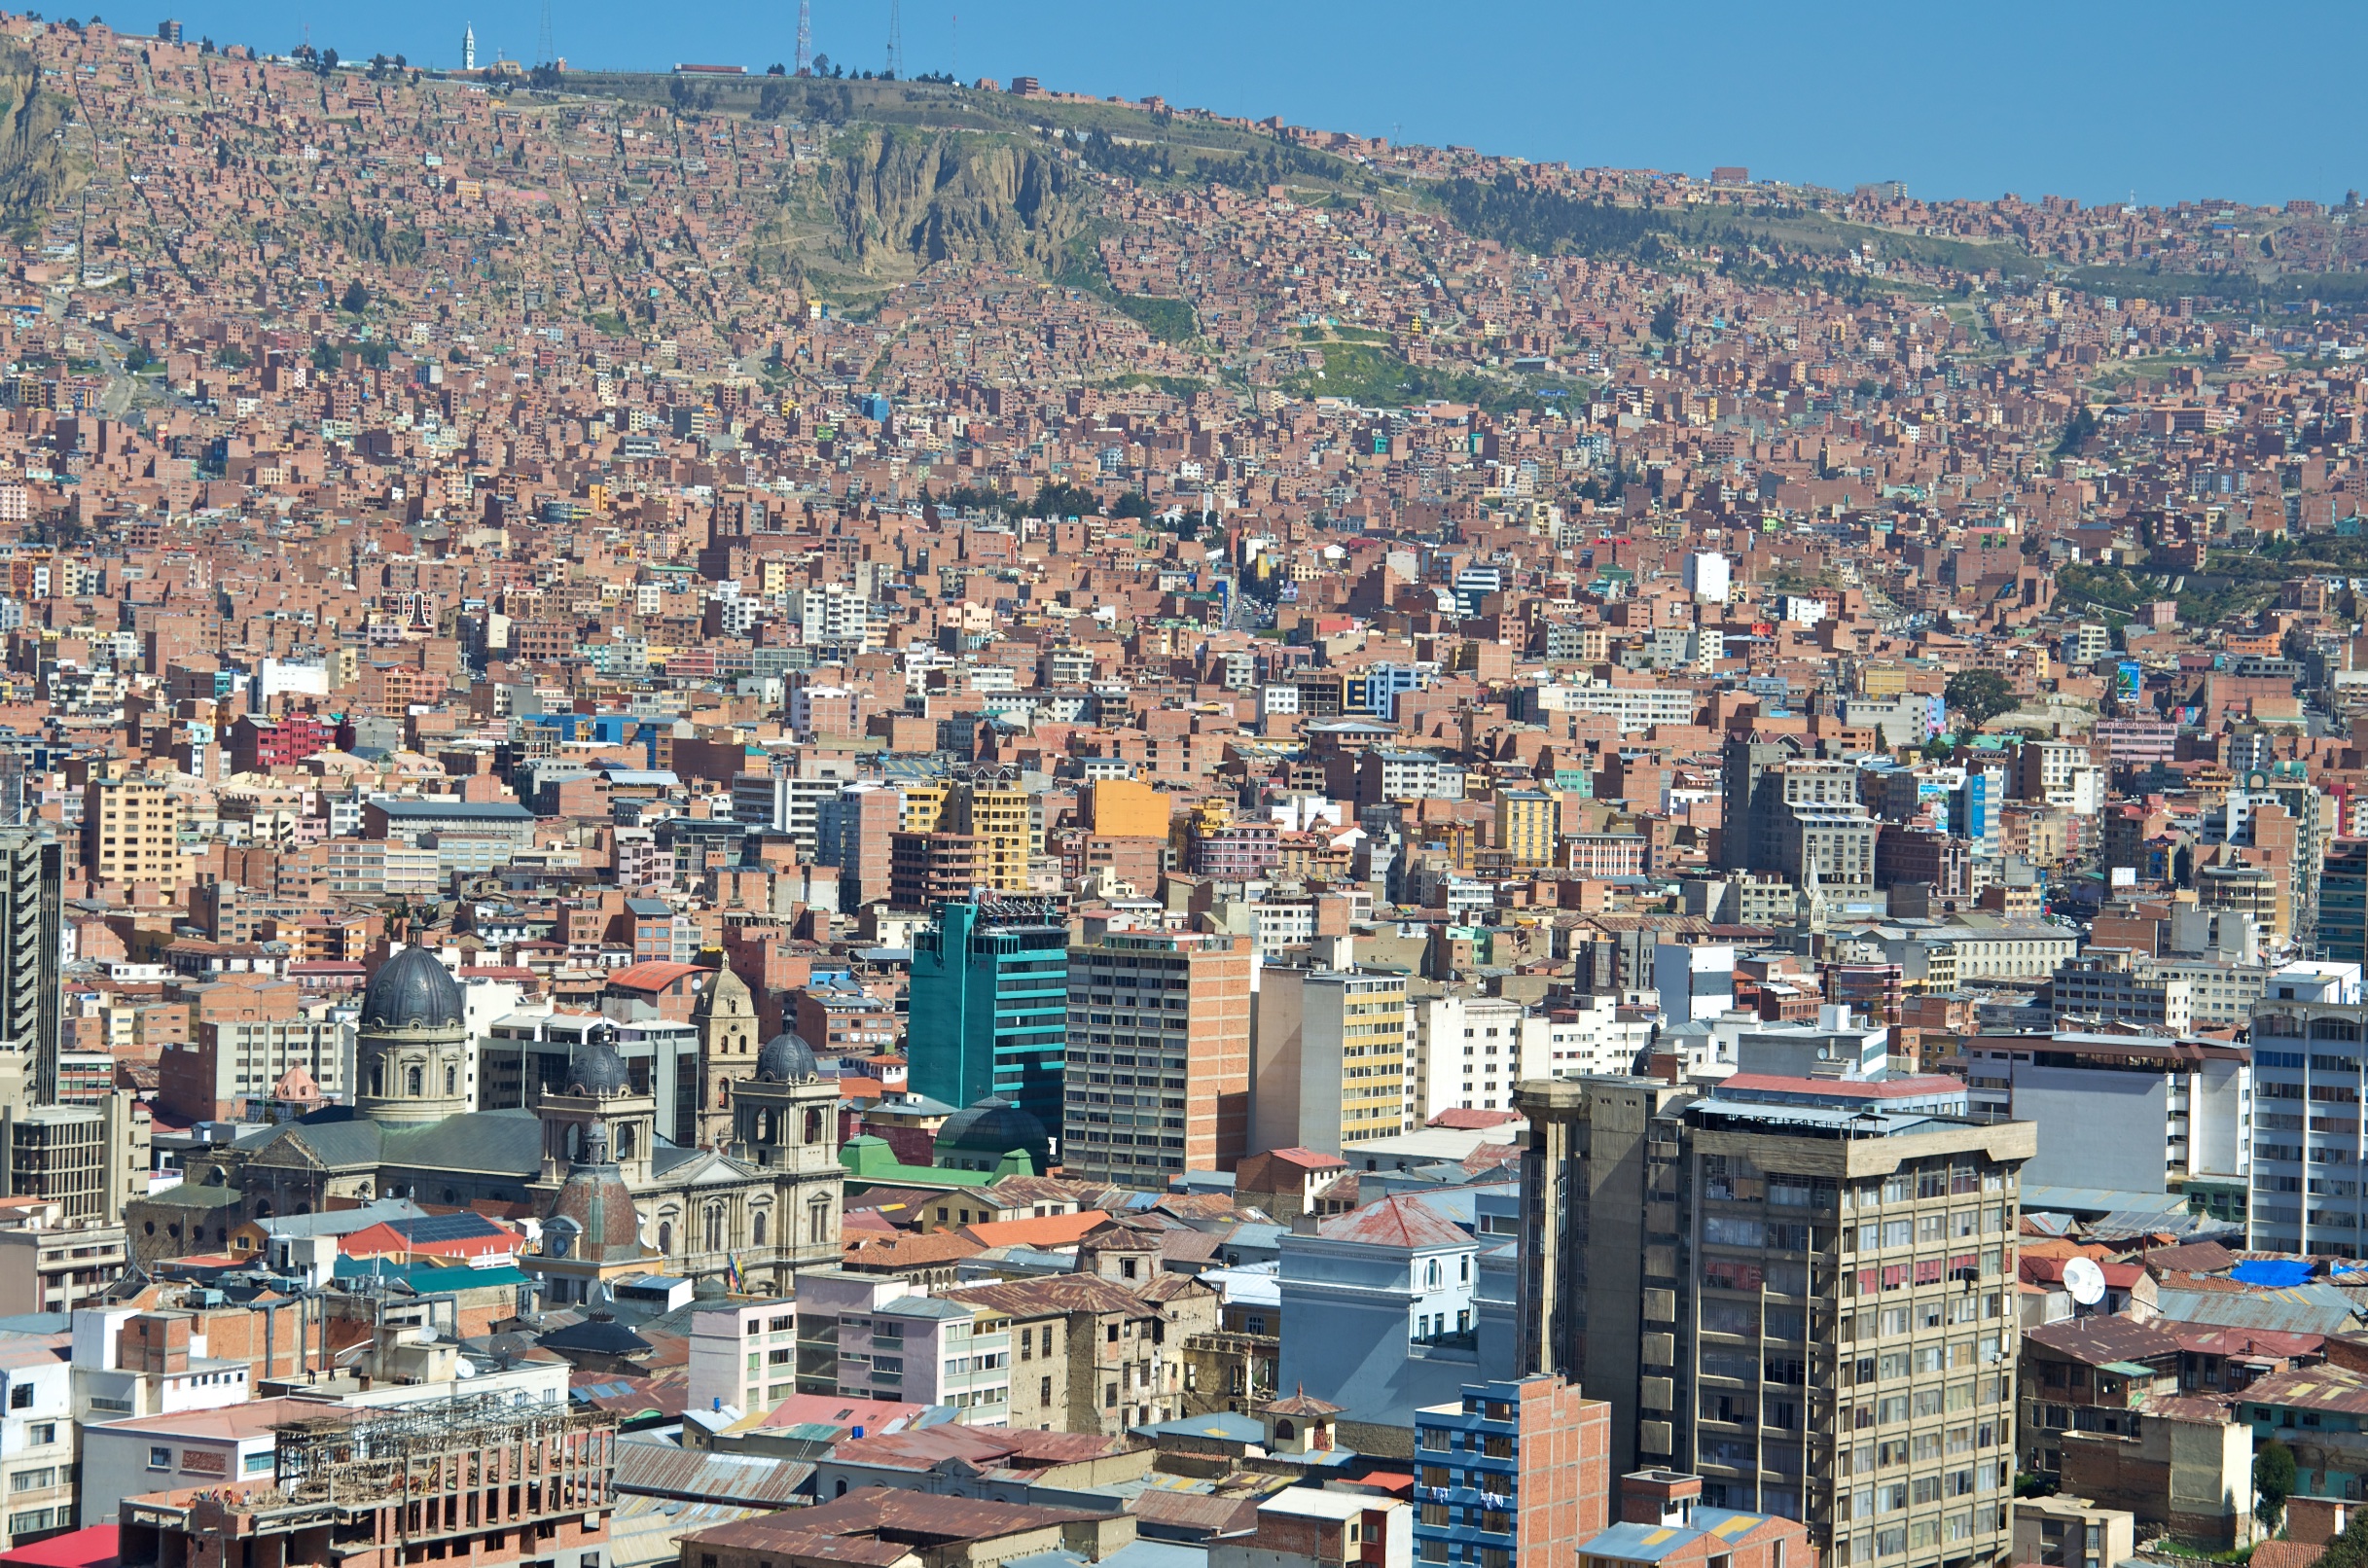  View from lookout, La Paz, Bolivia 